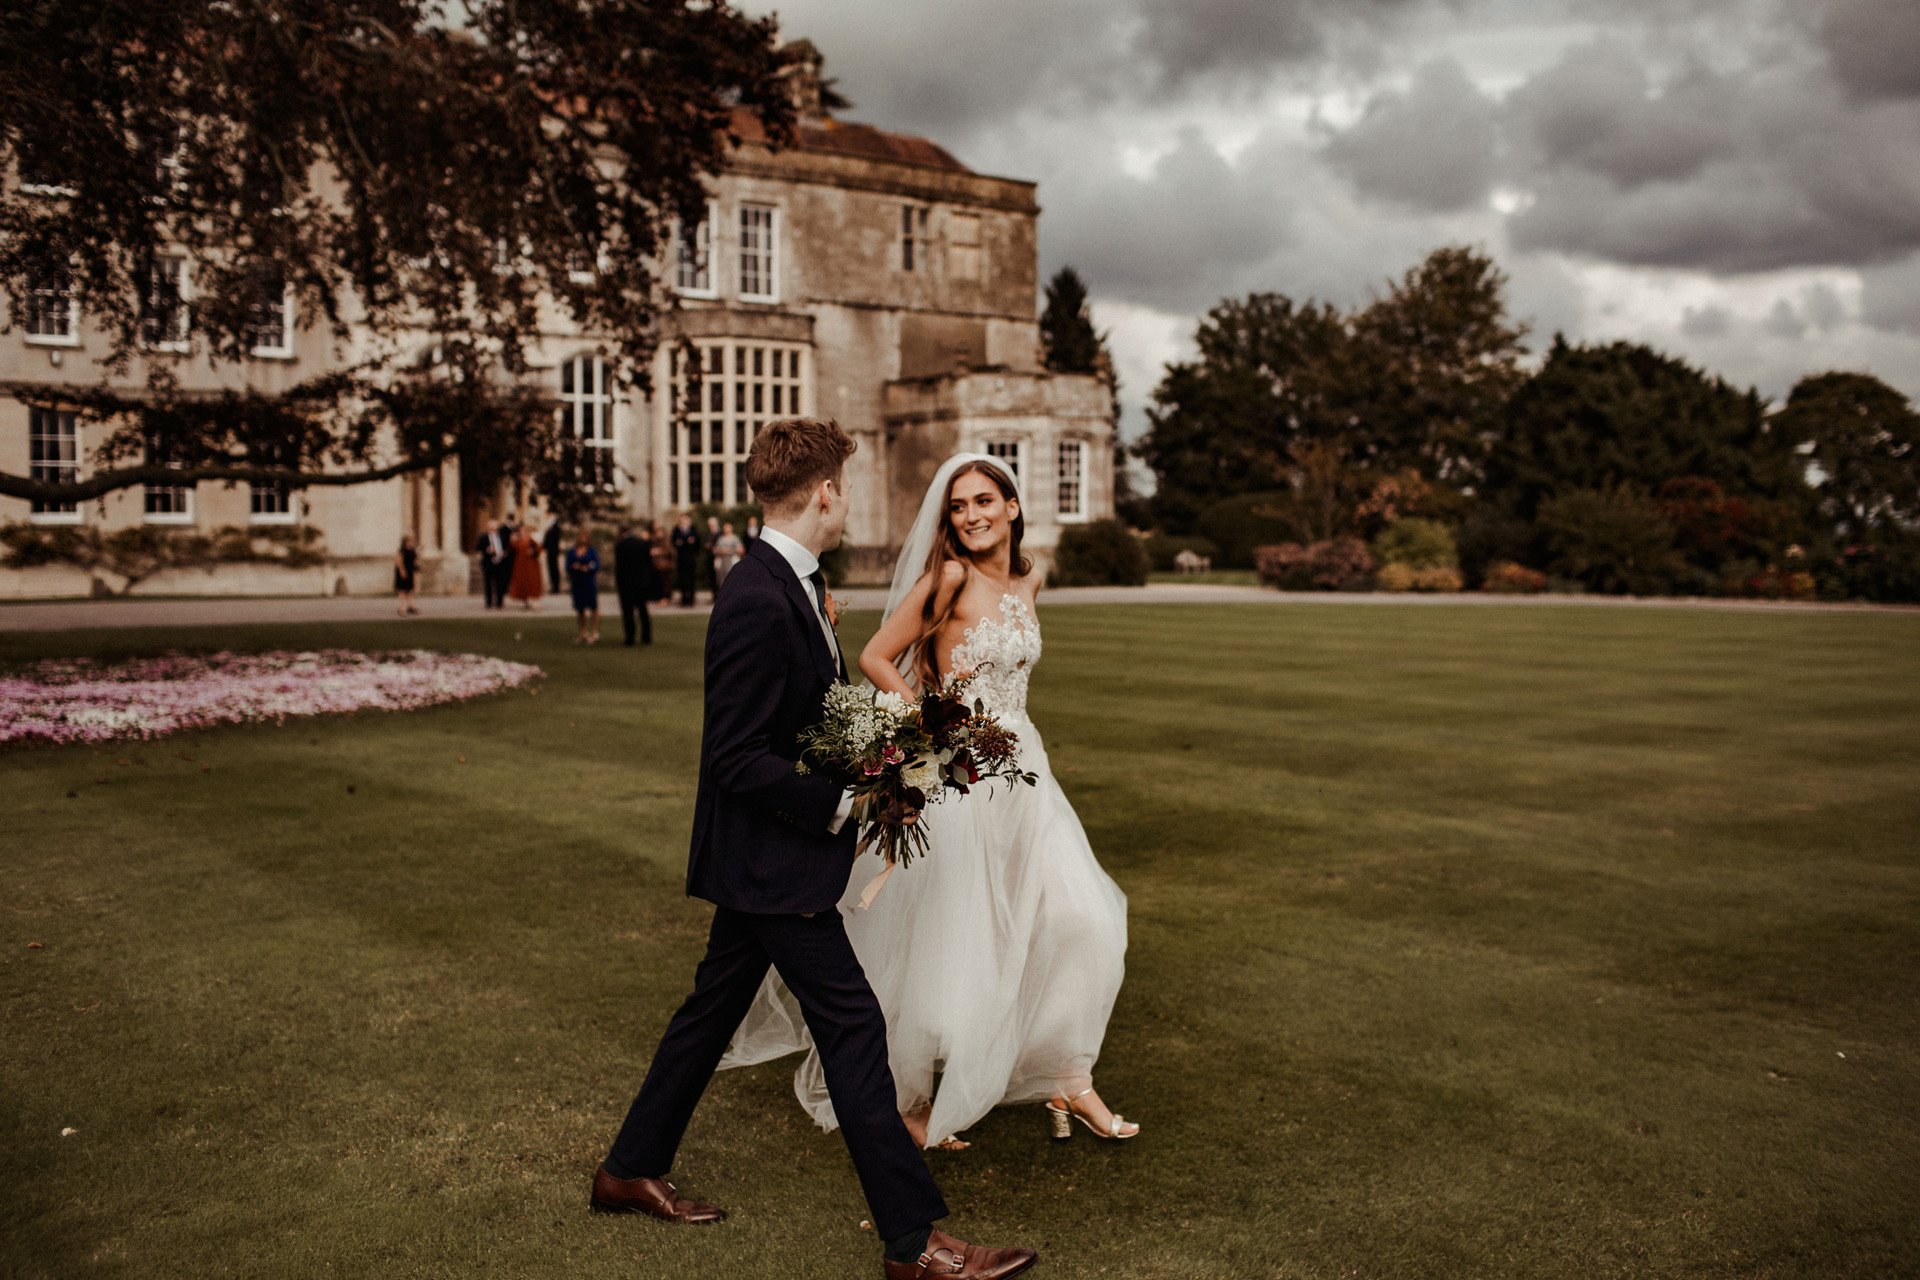 Modern boho bride and groom walk across the lawn in front of mansion house at their autumn wedding in October